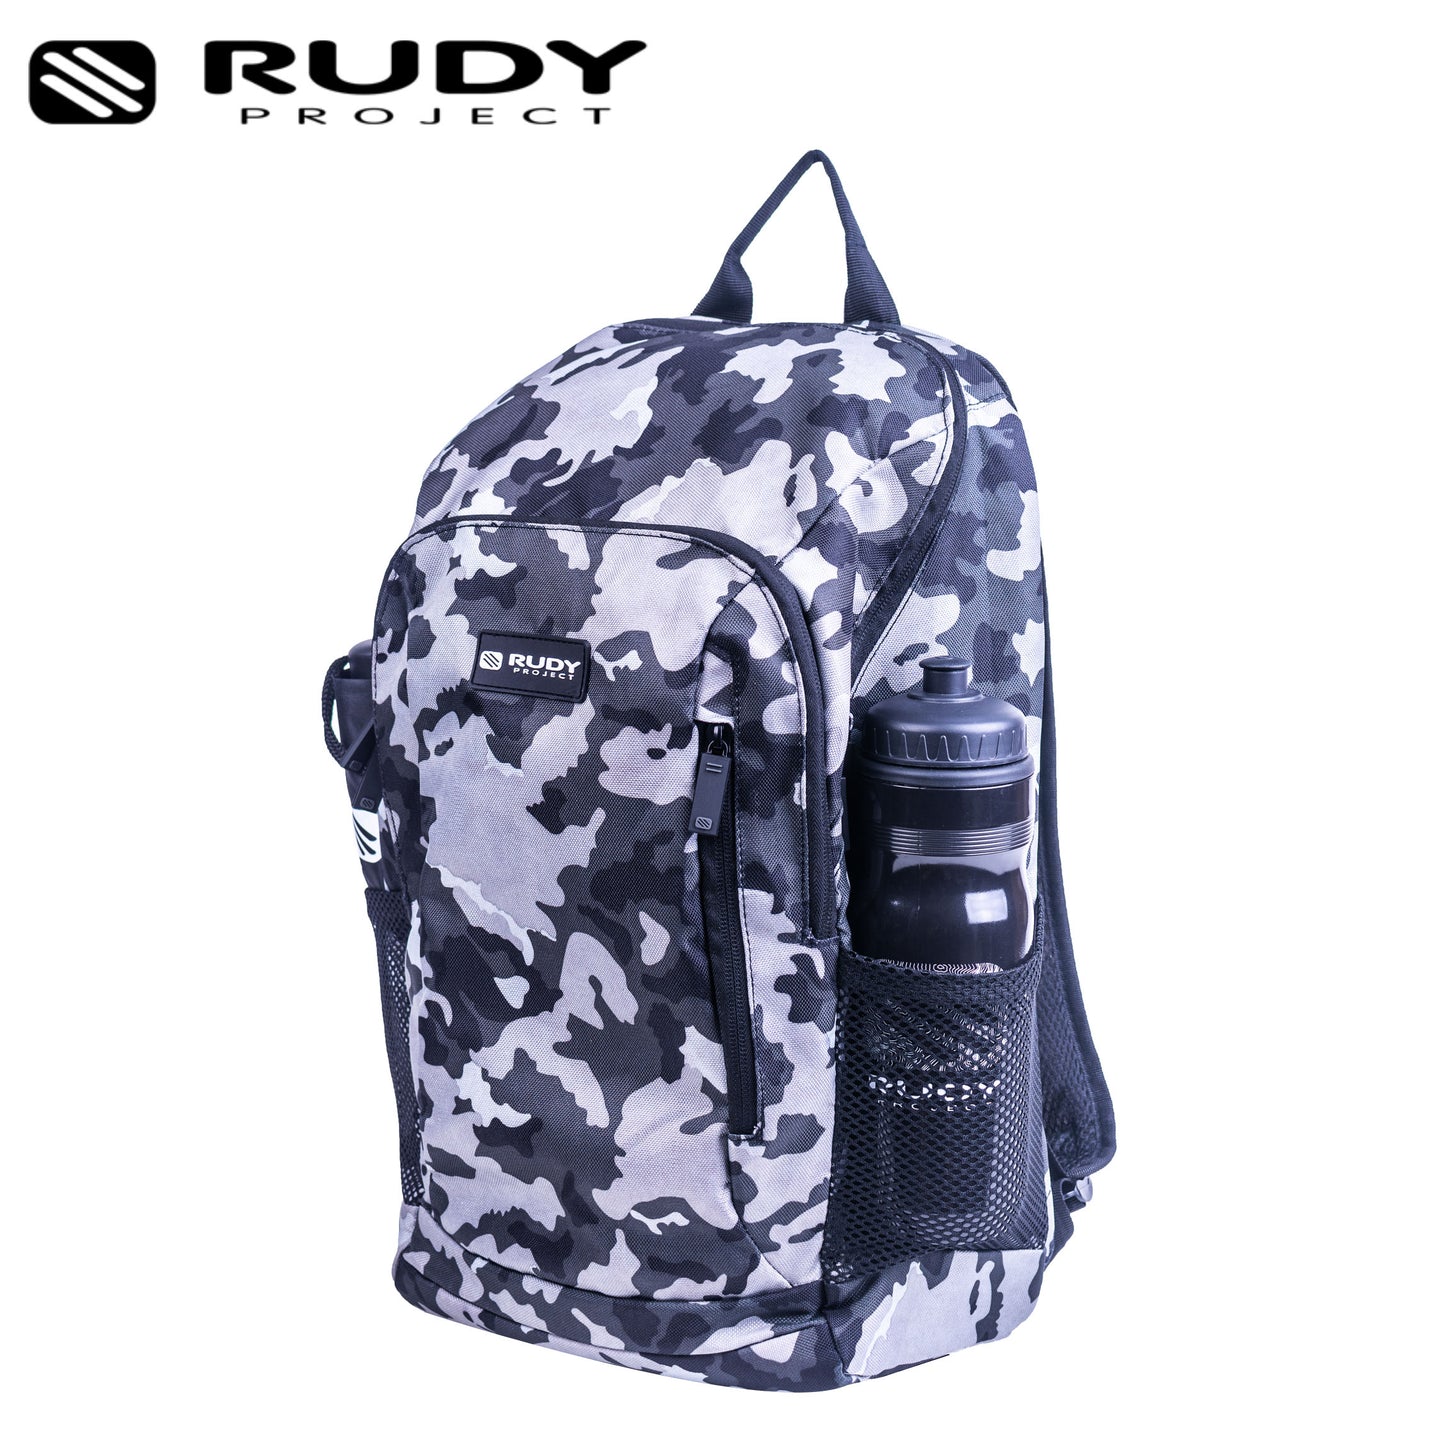 Rudy Project Forio Backpack in Camouflage